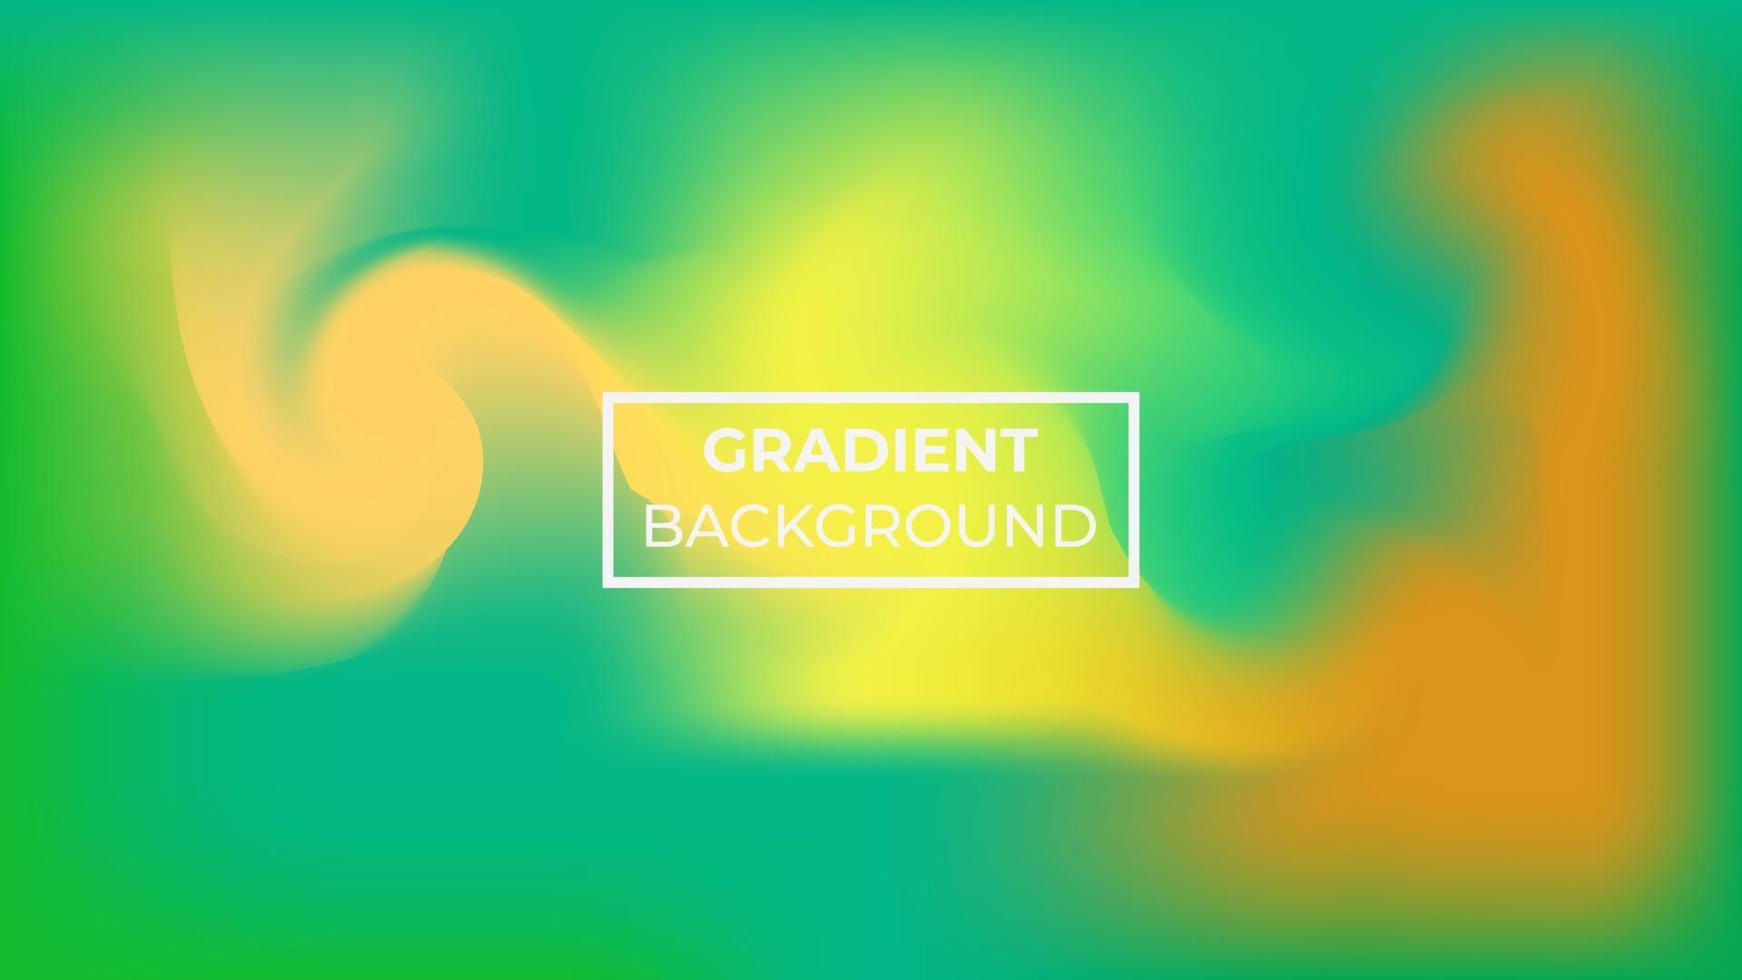 Abstract background with a mix of teal, yellow, and orange colors , easy to edit vector